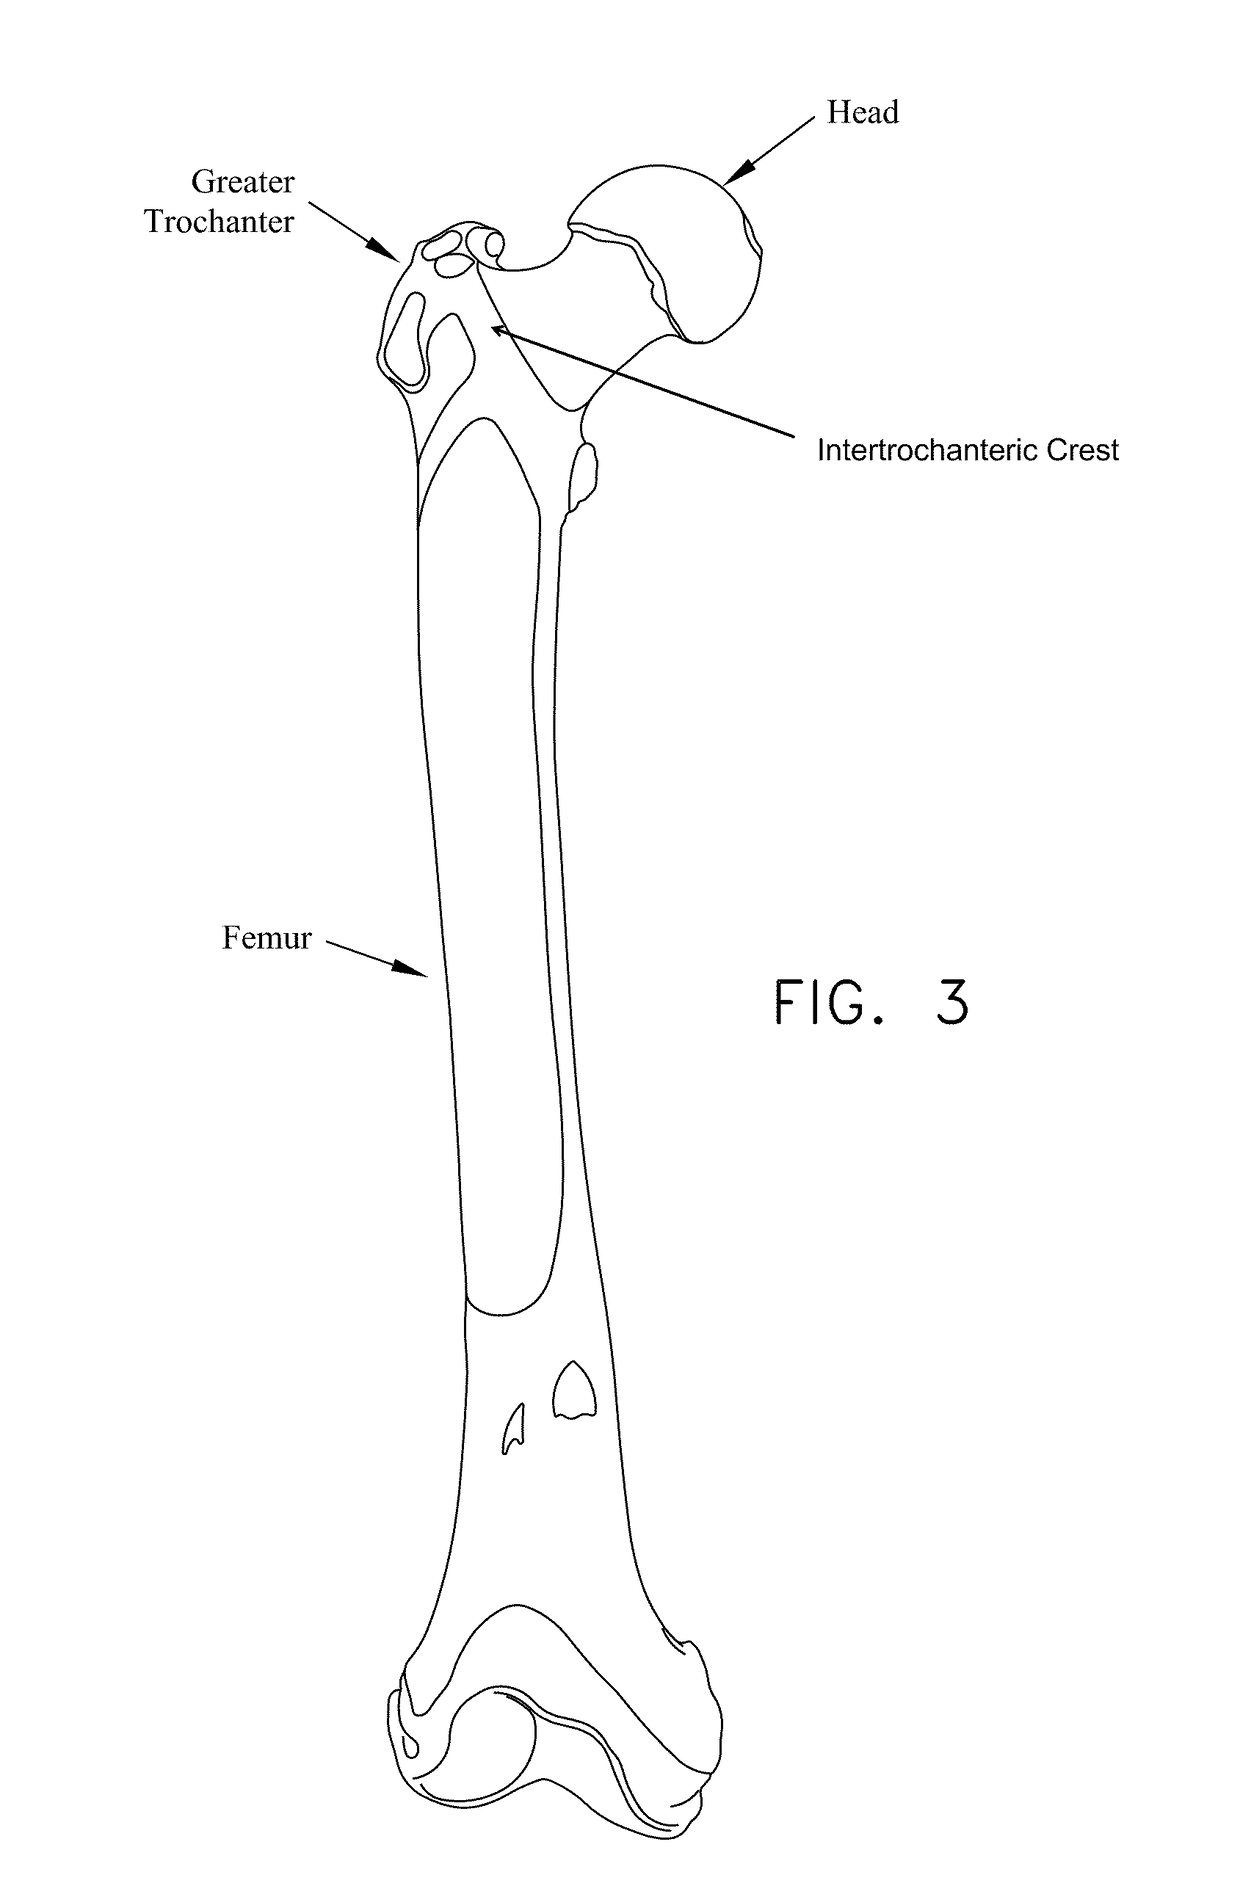 Method and apparatus for treating a hip joint, including the provision and use of a novel suture passer